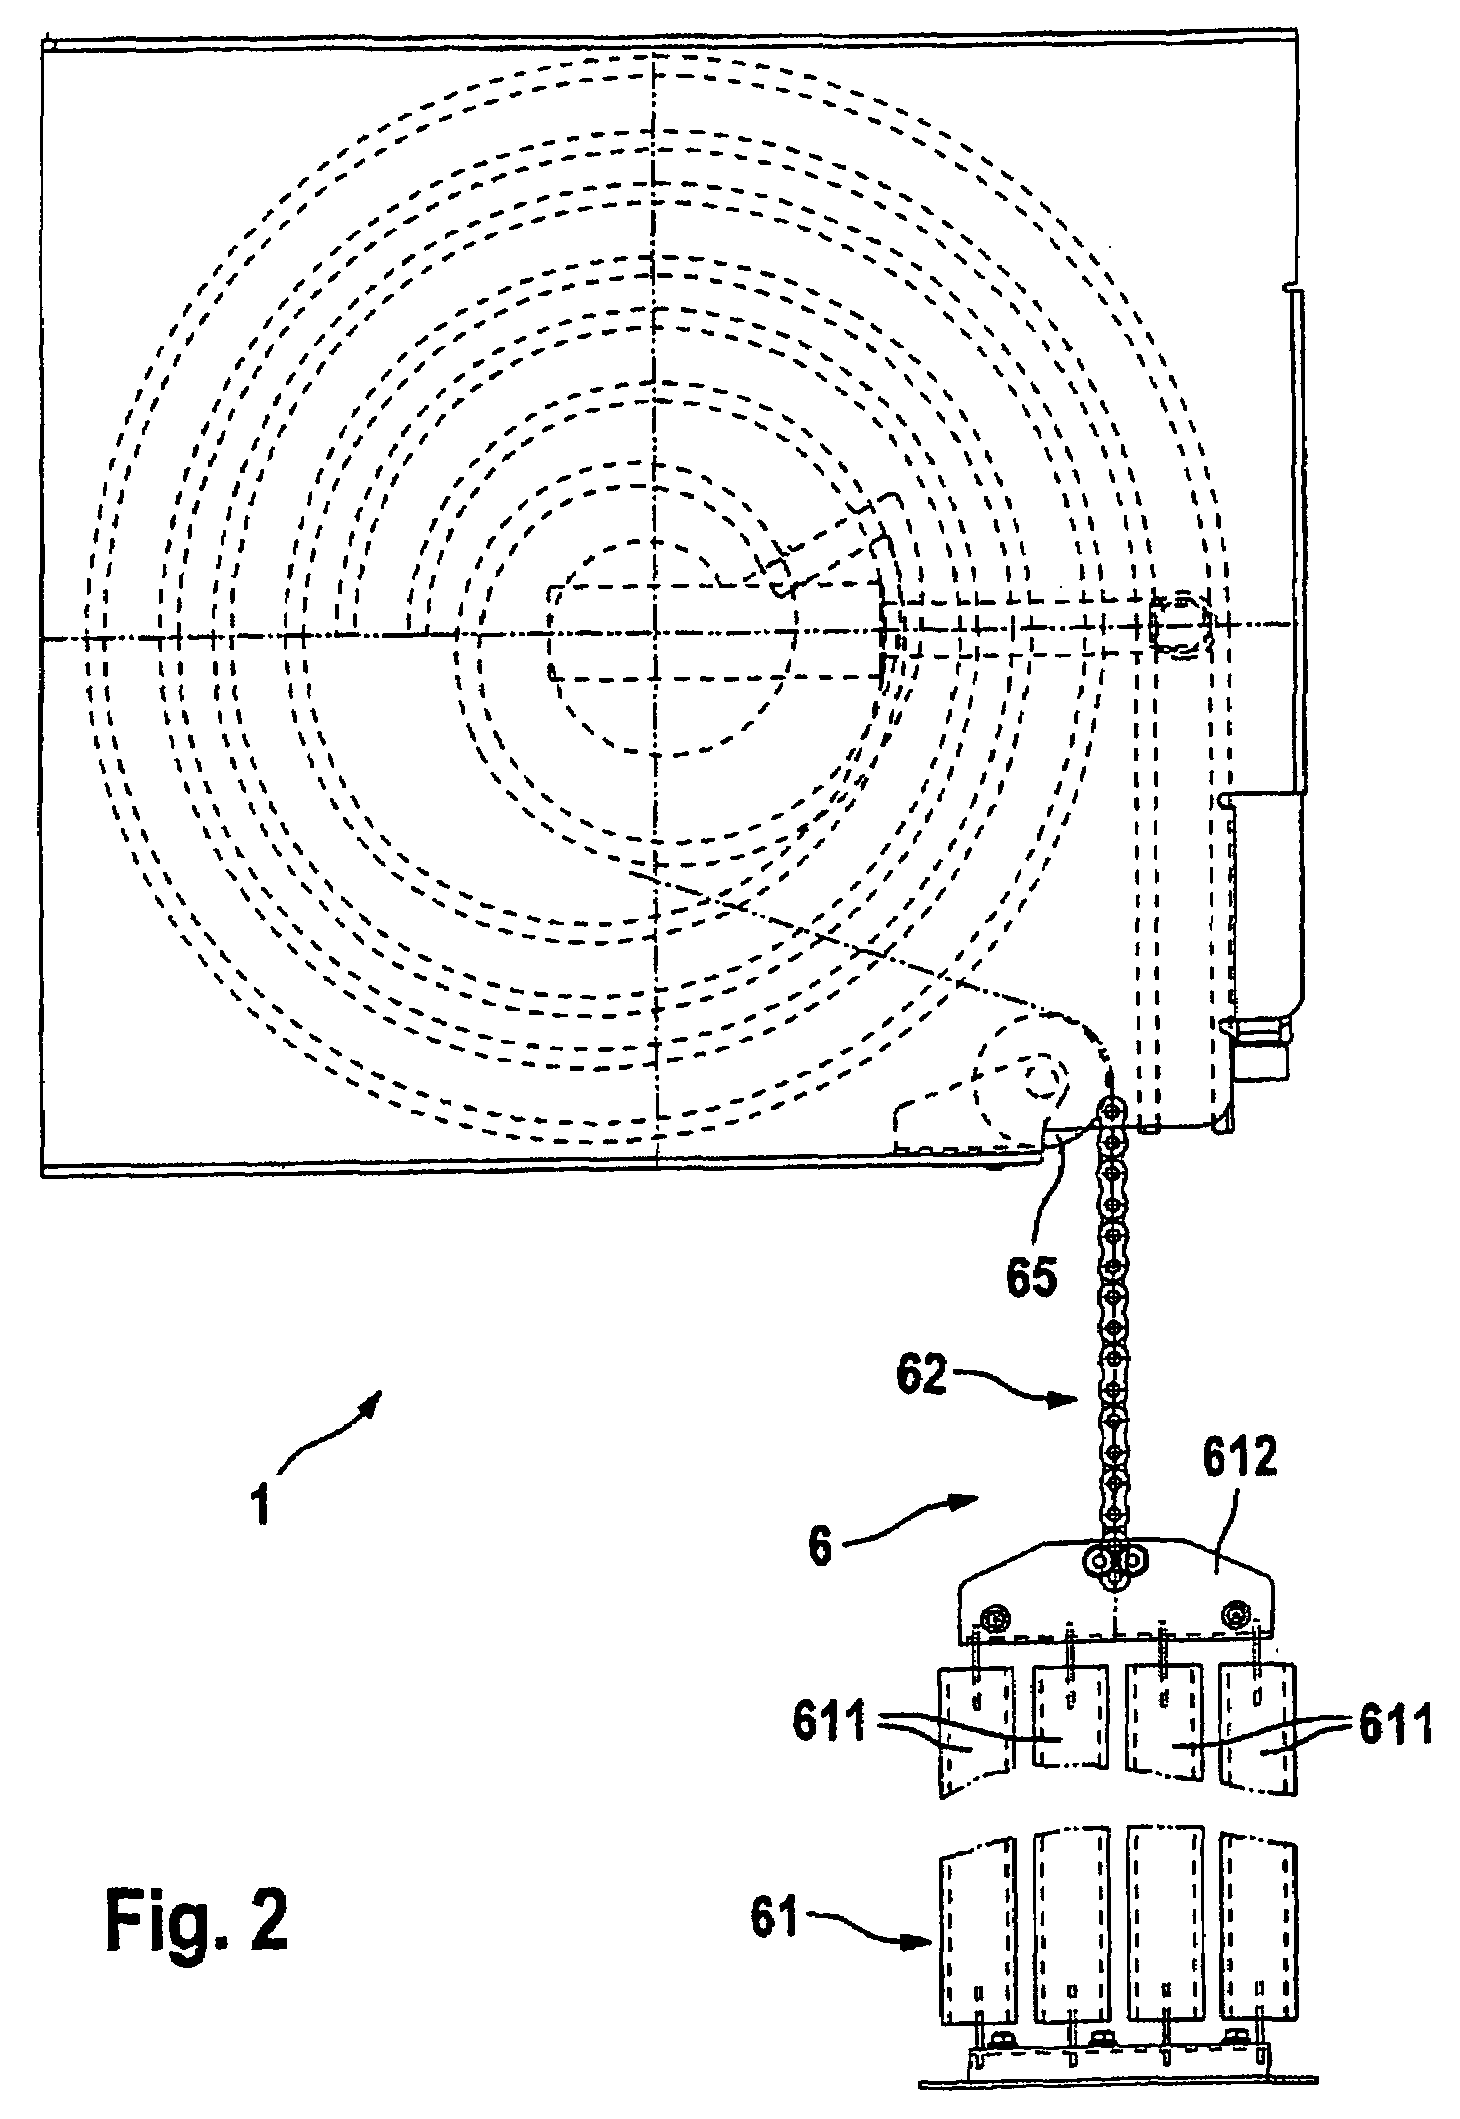 Weight compensation device for a lifting door